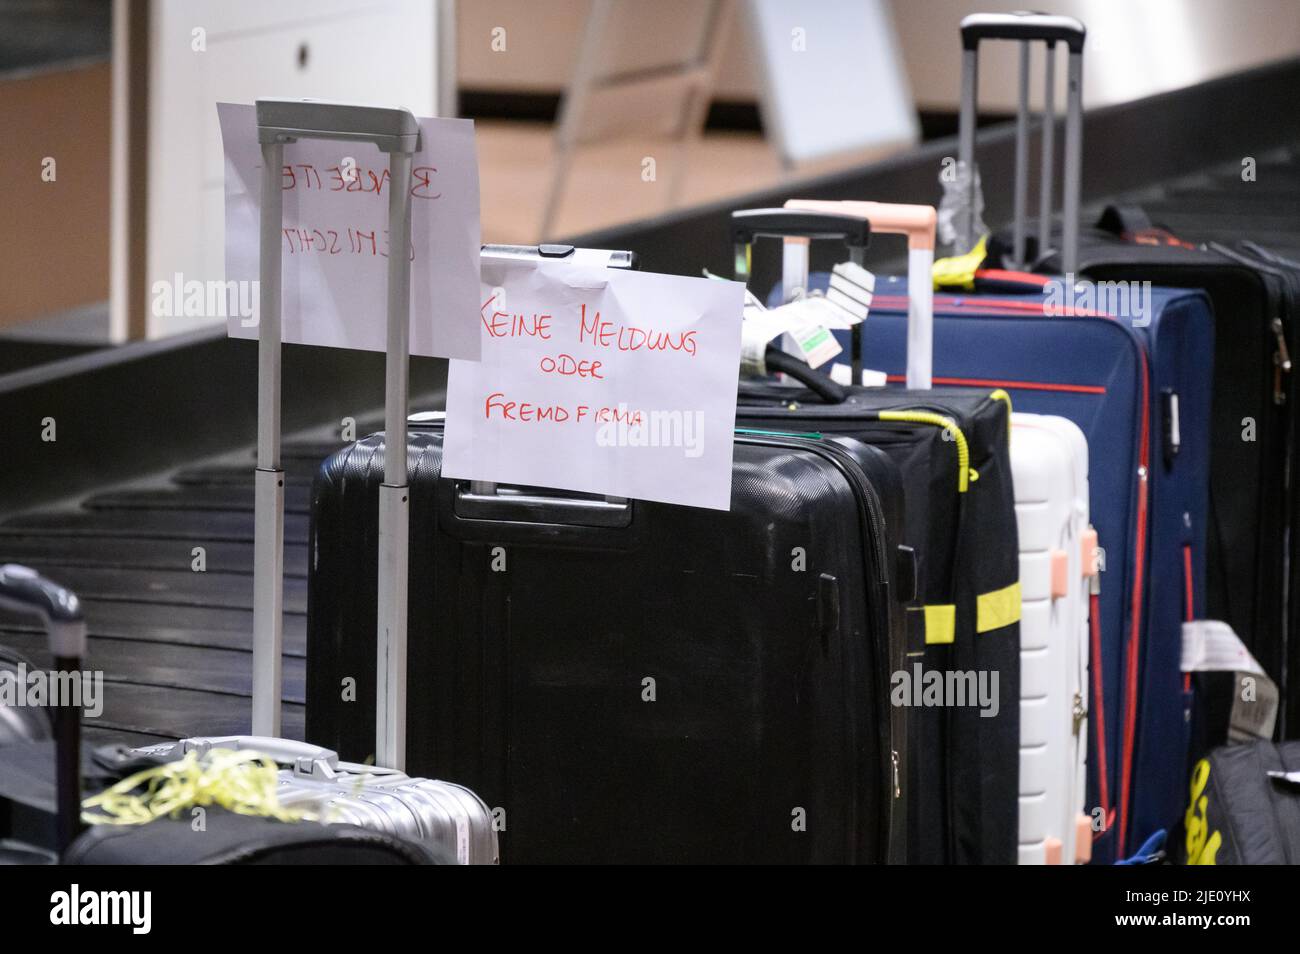 Hamburg, Germany. 23rd June, 2022. "No report or outside company" is  written on a note stuck to a suitcase. Hundreds of suitcases, bags and baby  carriages are still piled up in the